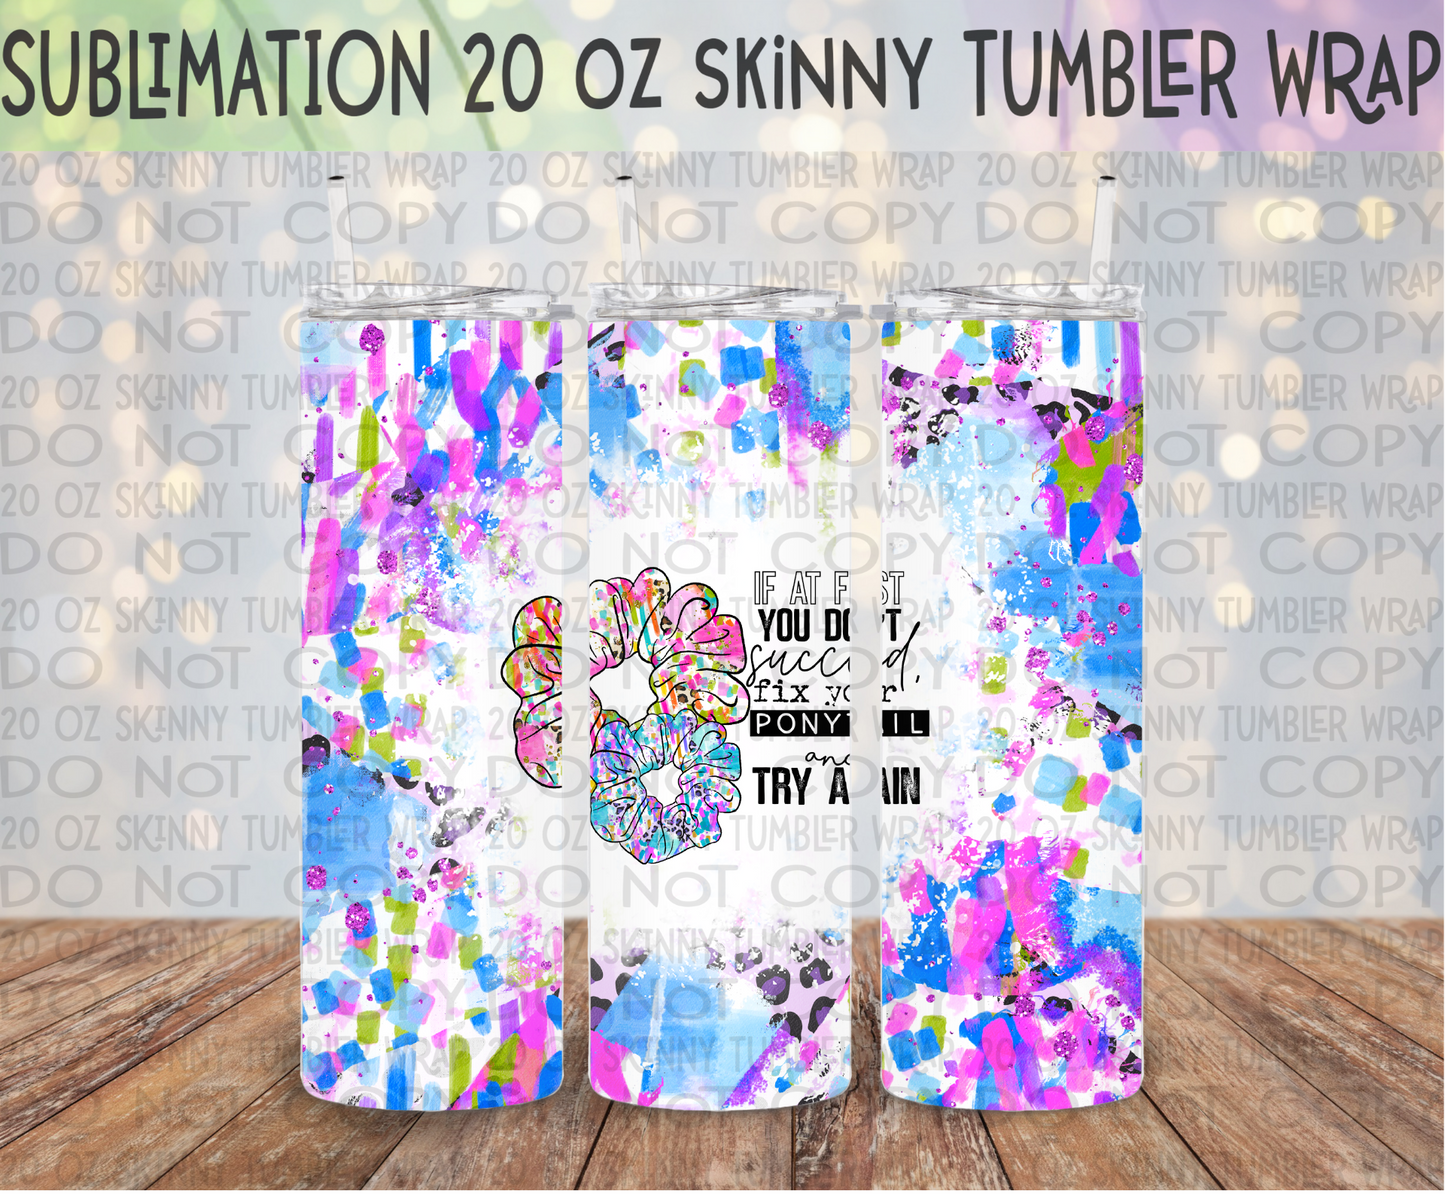 If at First You don't Succeed 20 Oz Skinny Tumbler Wrap - Sublimation Transfer - RTS